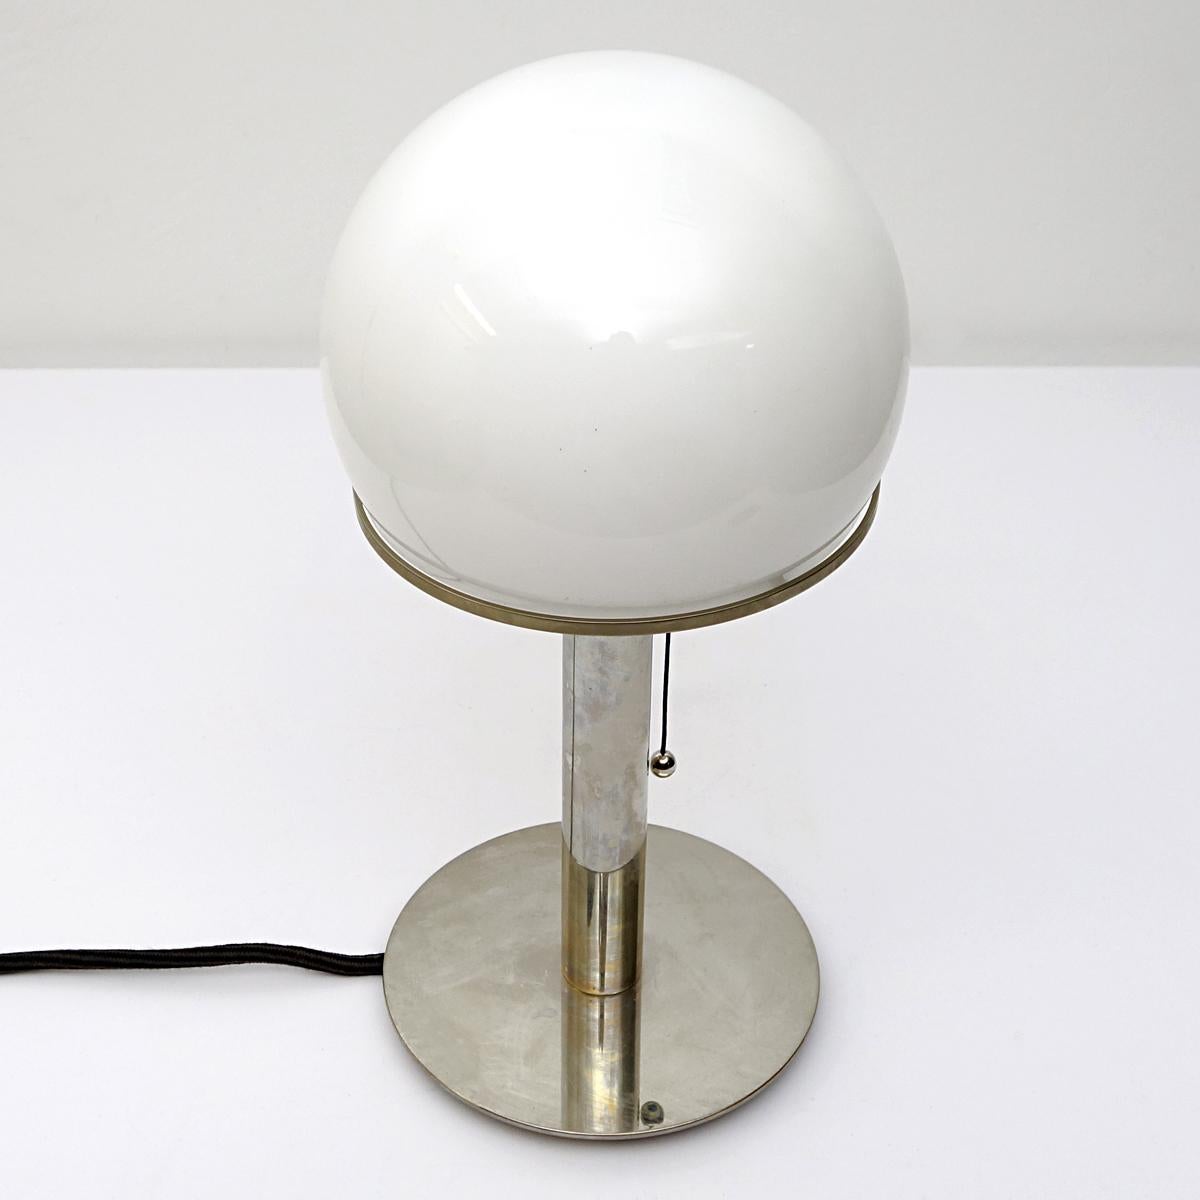 This lamp was designed in 1924 and still looks incredibly modern.
Wilhelm Wagenfeld is the mastermind behind this item that has come to be known as the 